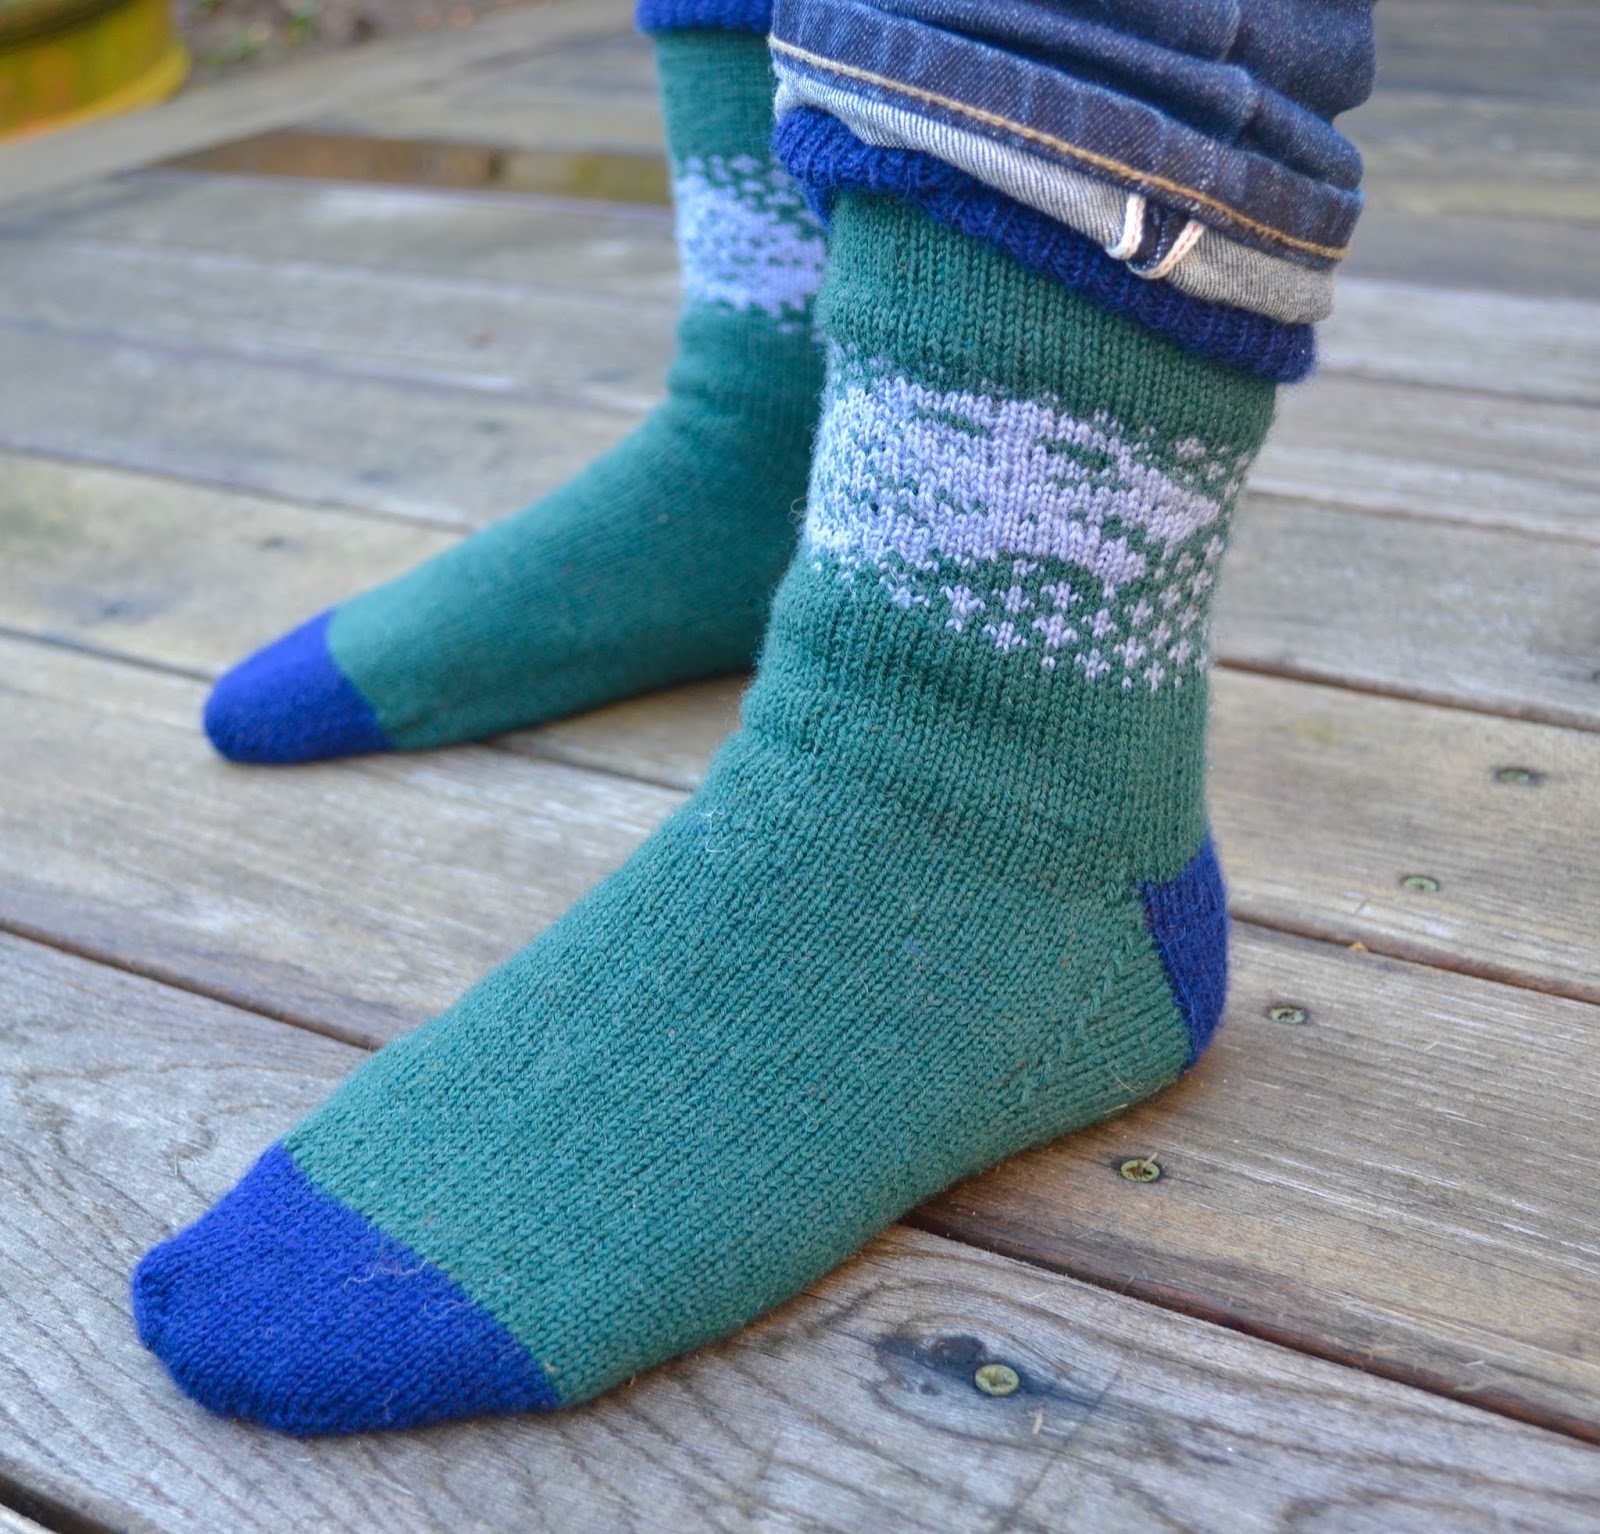 Ginx Craft : Direwolf Socks (learning by my mistakes)